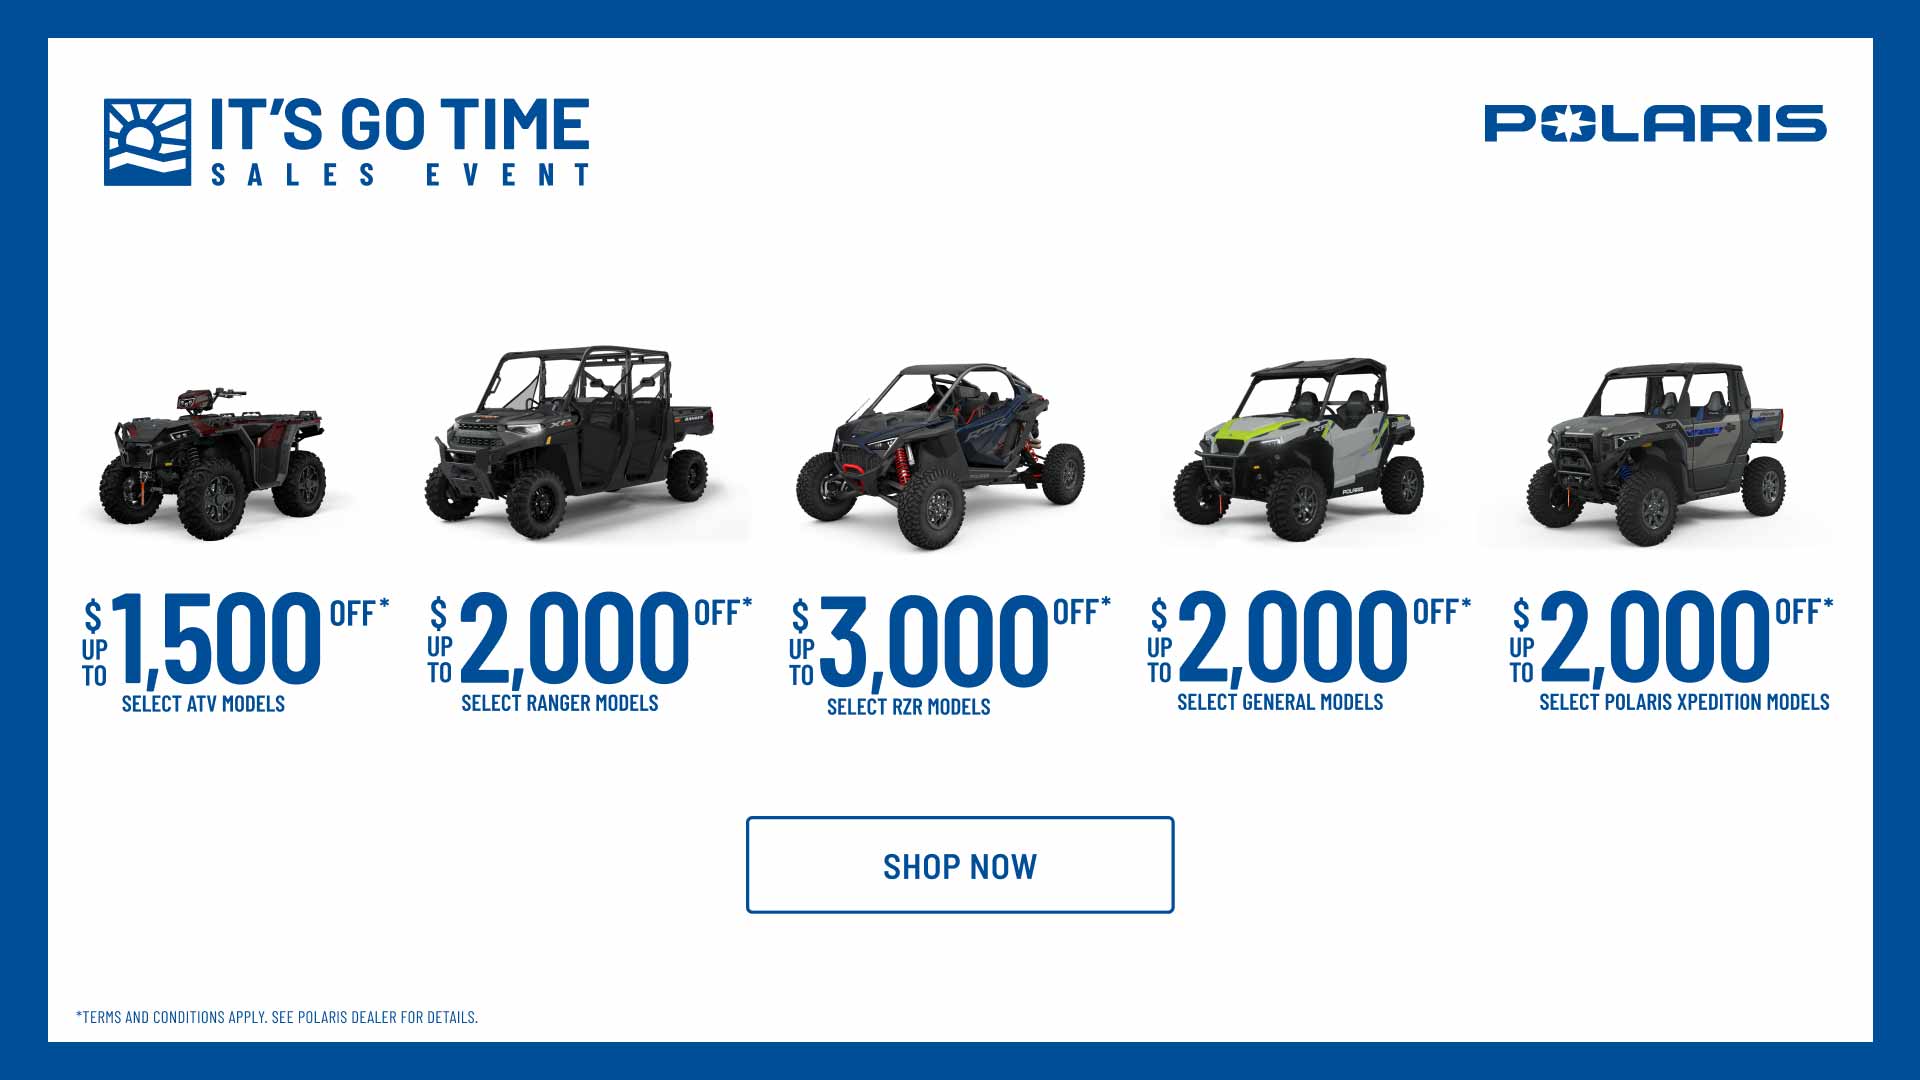 It's Go Time Sales Event at Santa Fe Motor Sports